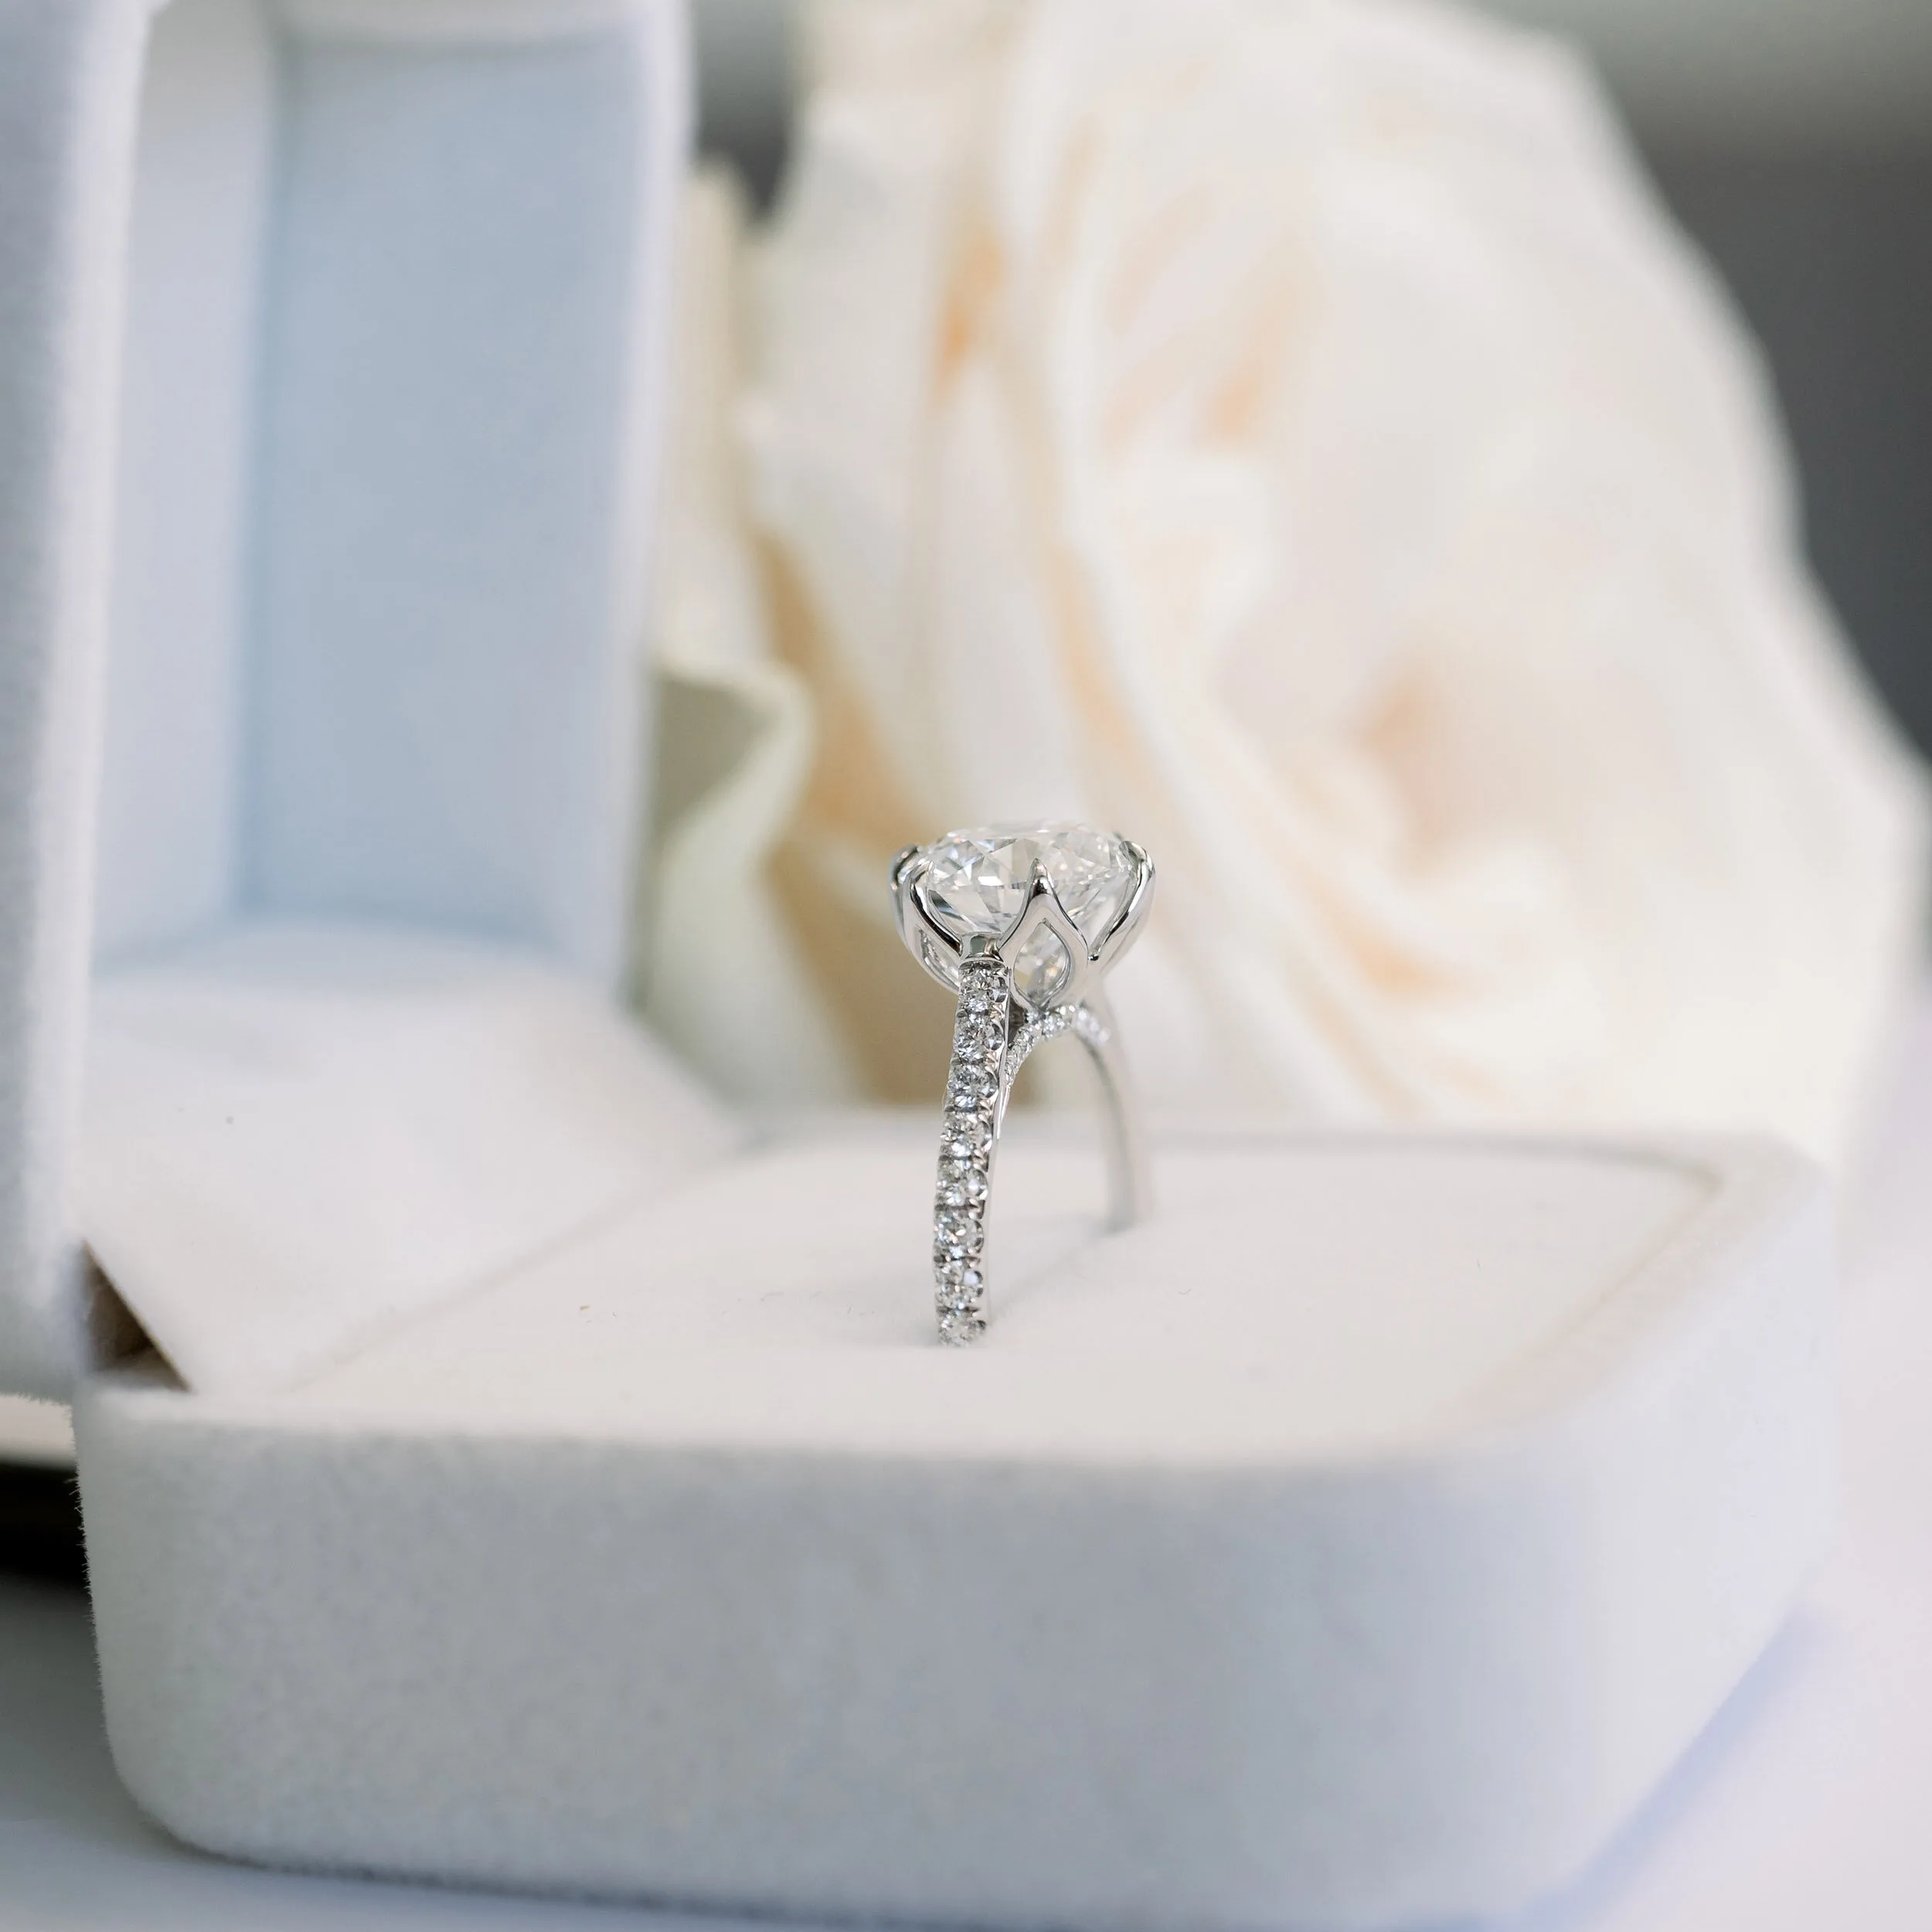 Platinum 2.5 Carat Round Cathedral Six Prong Engagement Ring with Diamonds on the Band Made with Lab Created Diamonds Ada Diamonds Design AD-178 Profile View